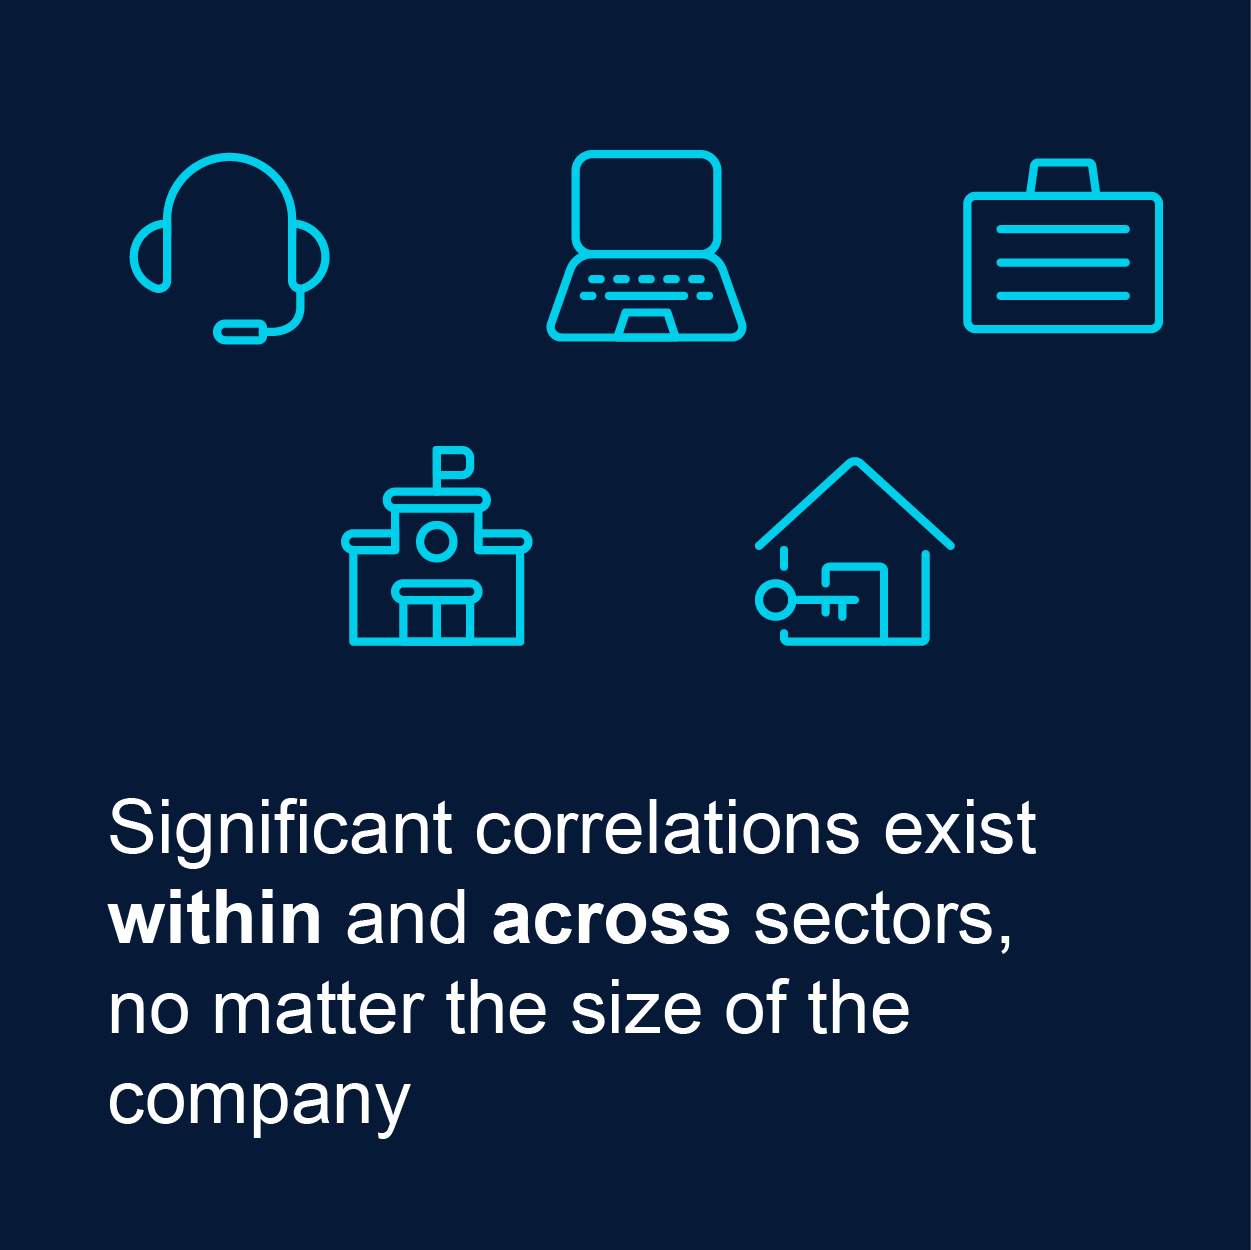 Significant correlations exist within and across sectors, no matter the size of the company